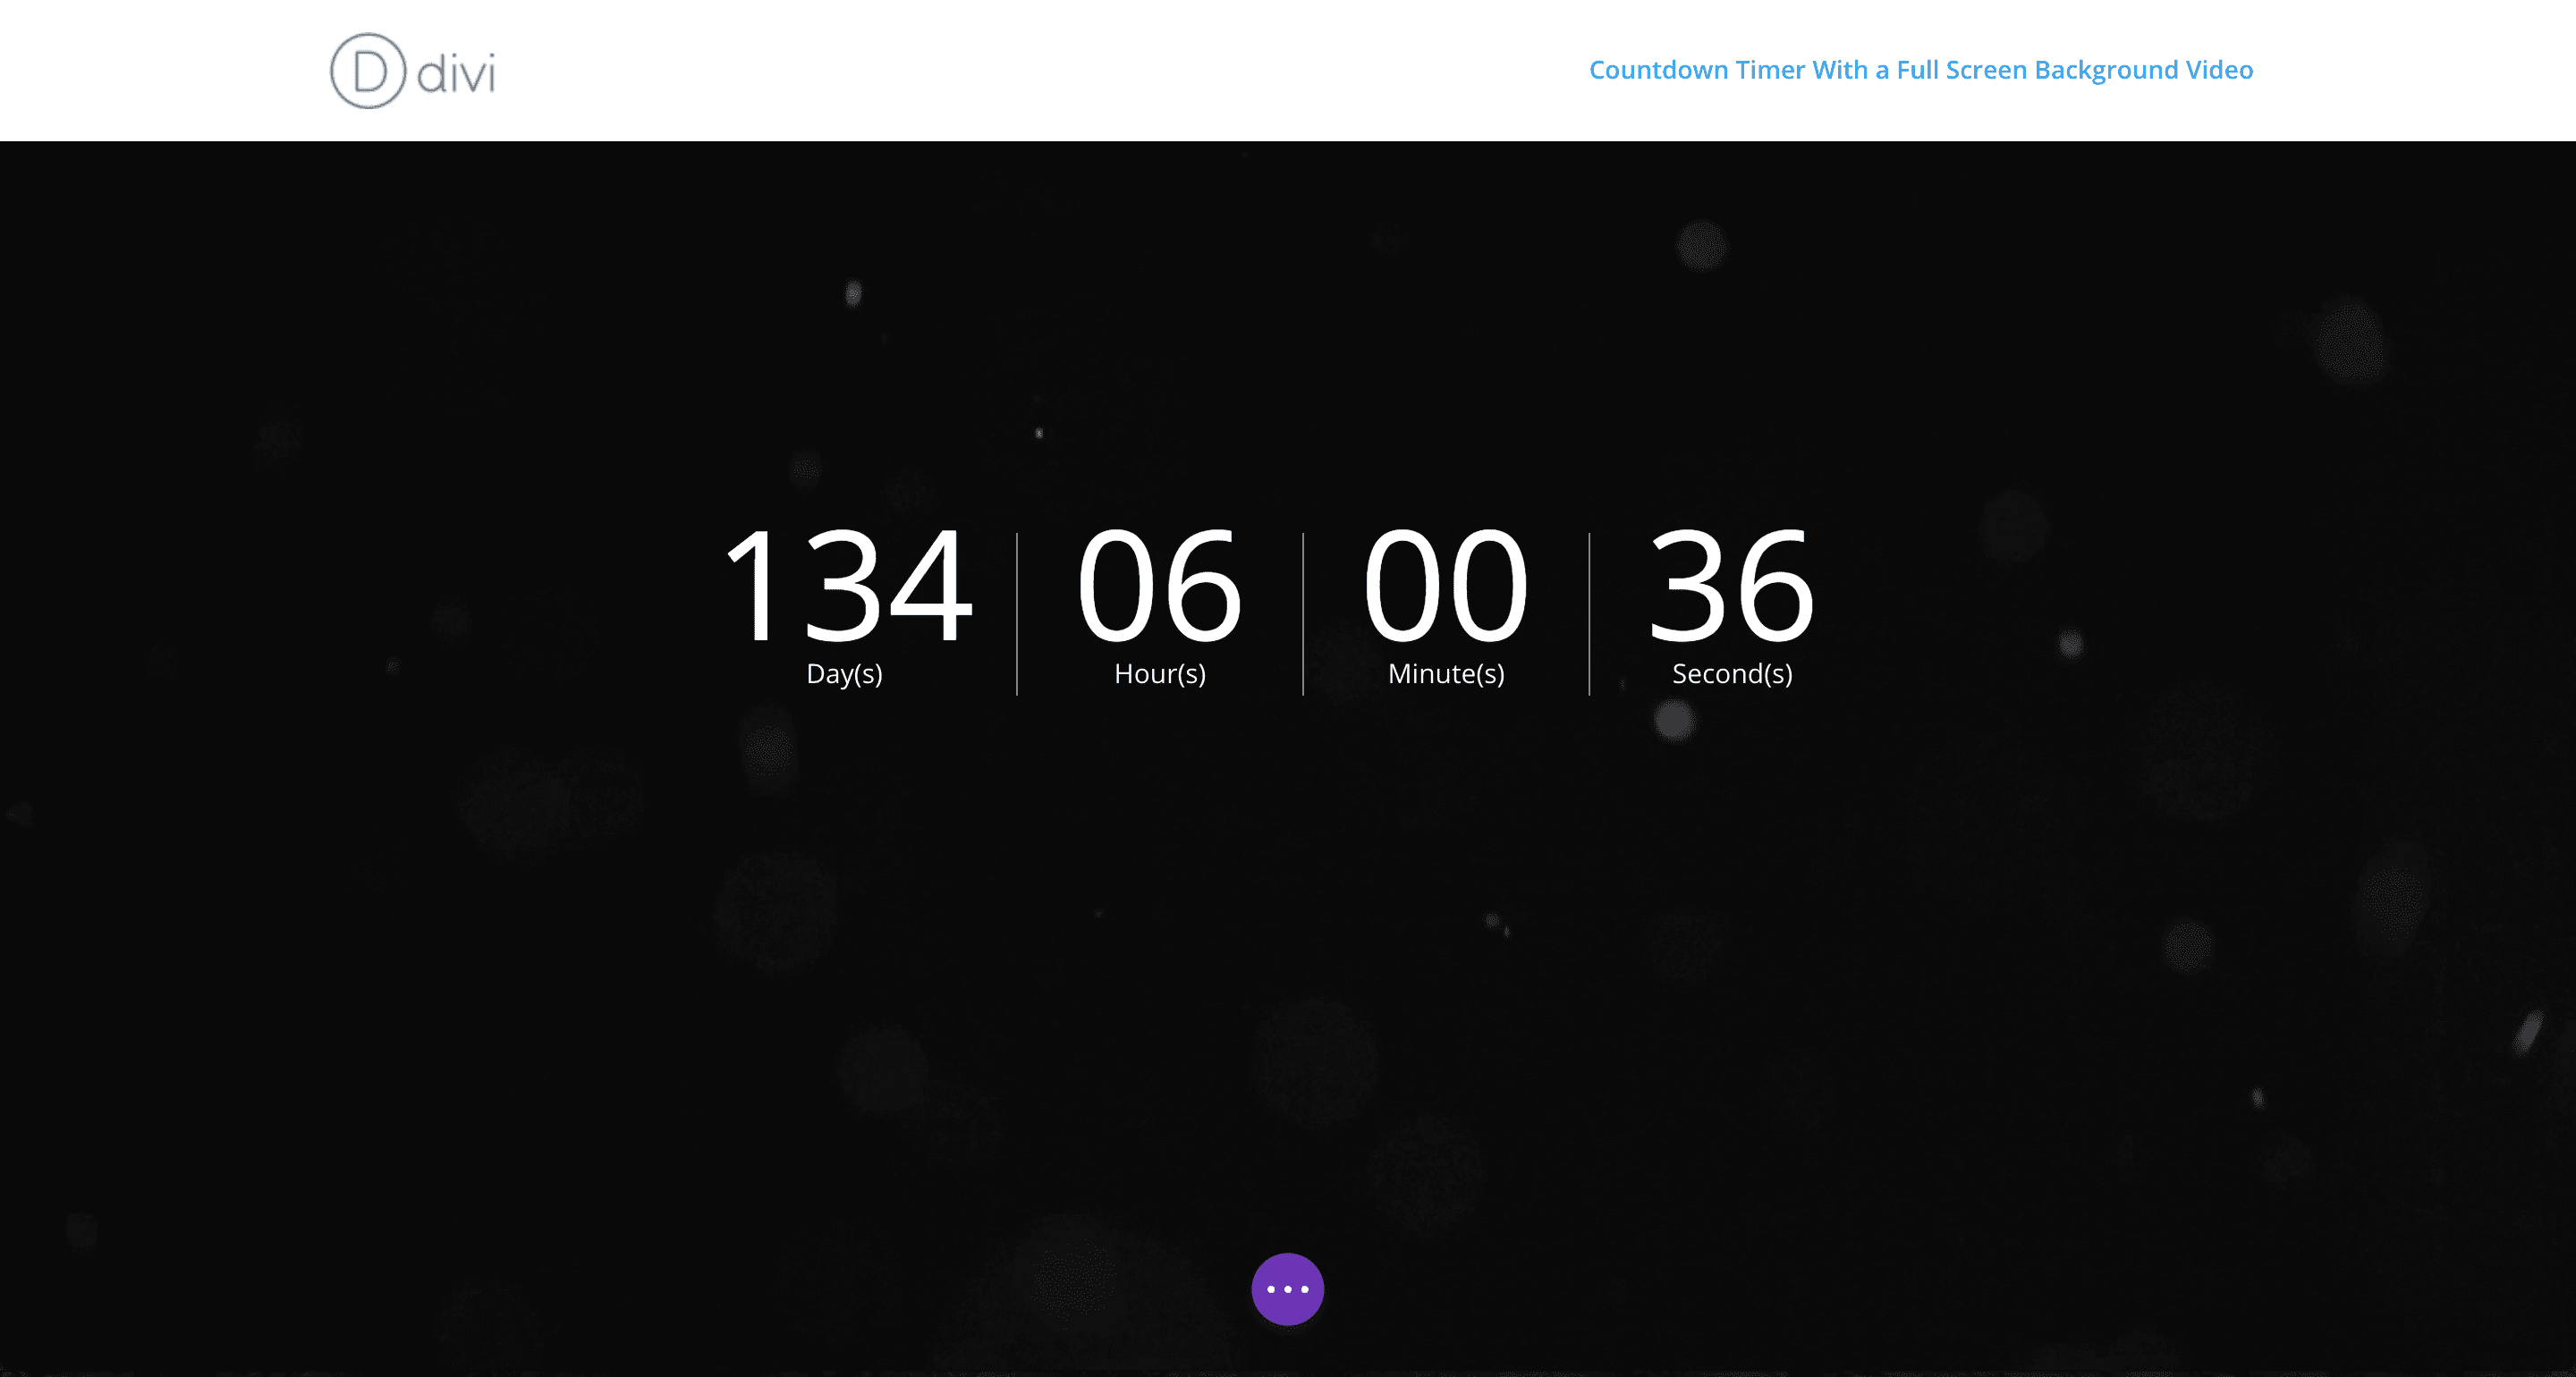 Set up an online countdown timer black background for your event